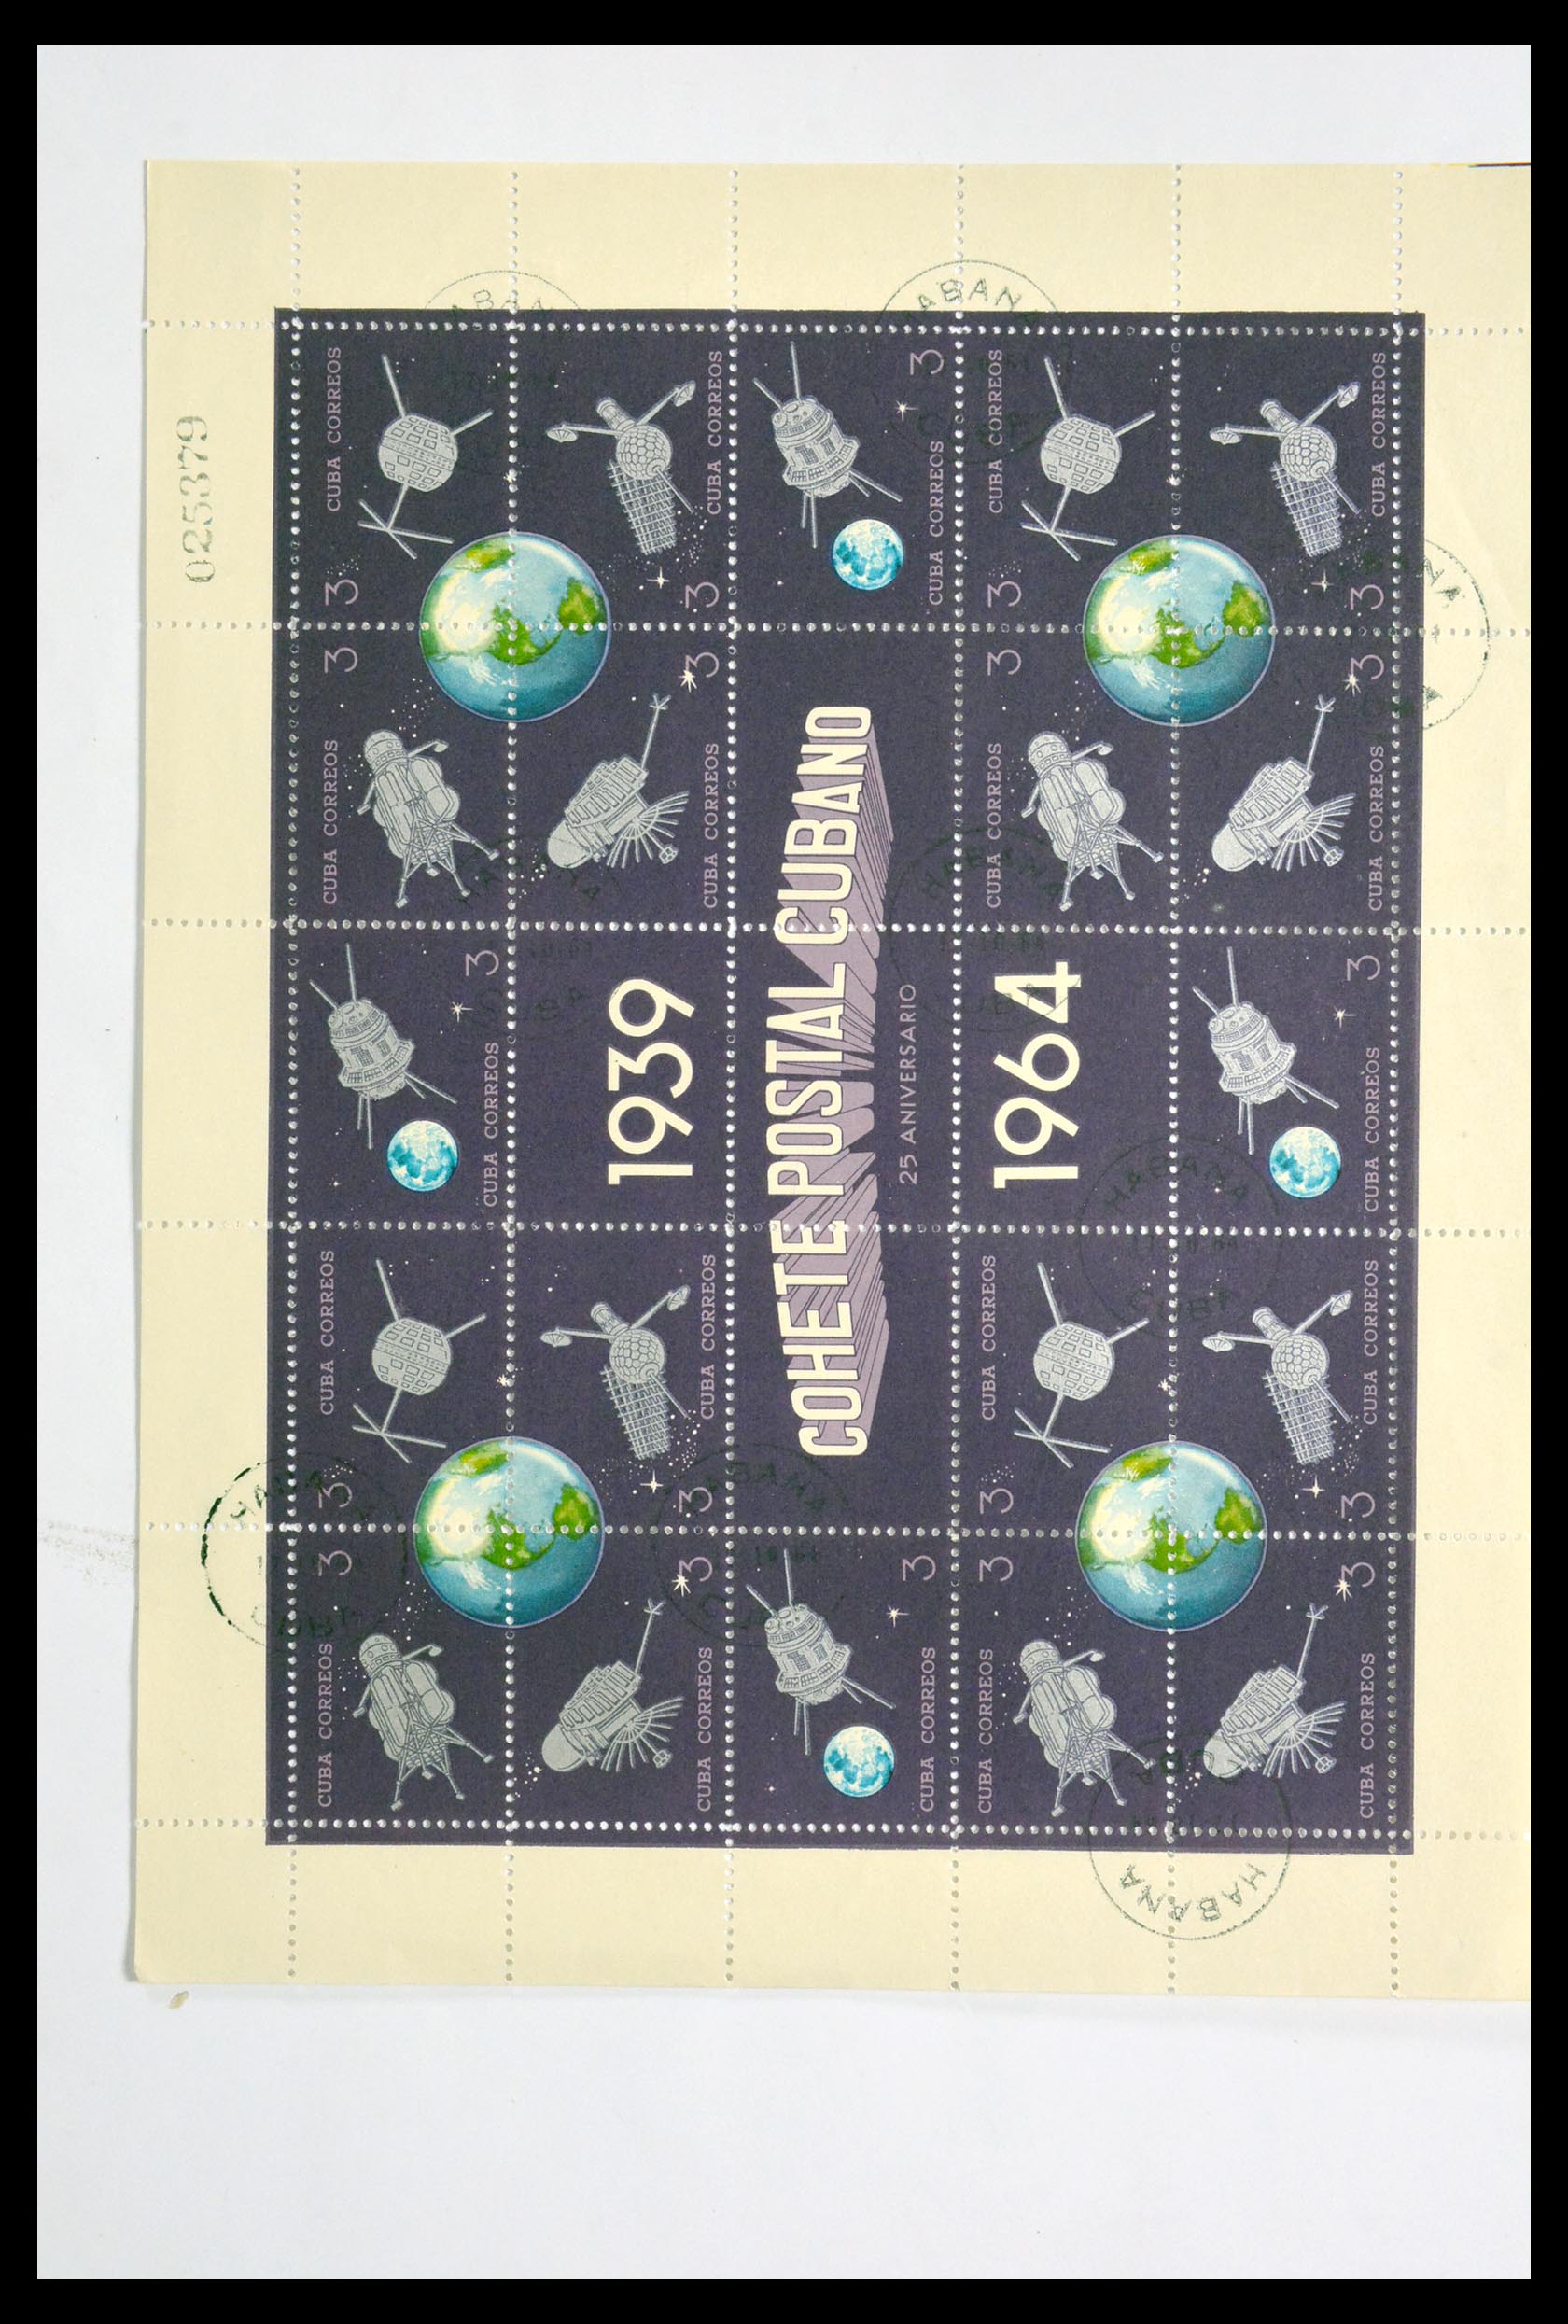 29917 067 - 29917 Latin America airmail stamps.